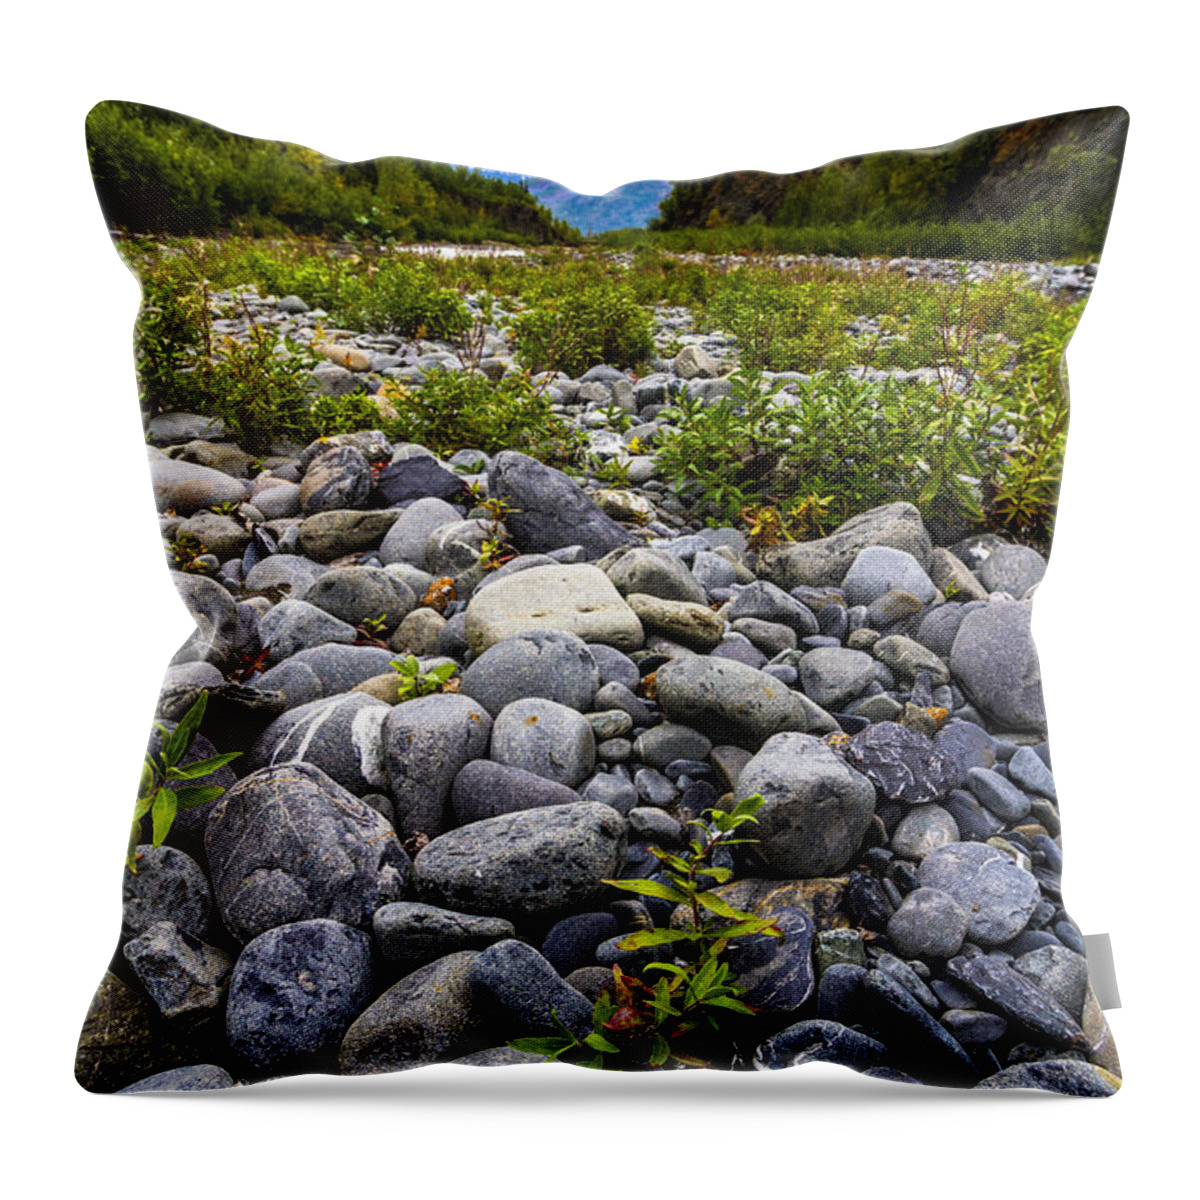 Landscape Throw Pillow featuring the photograph River Side by Kyle Lavey